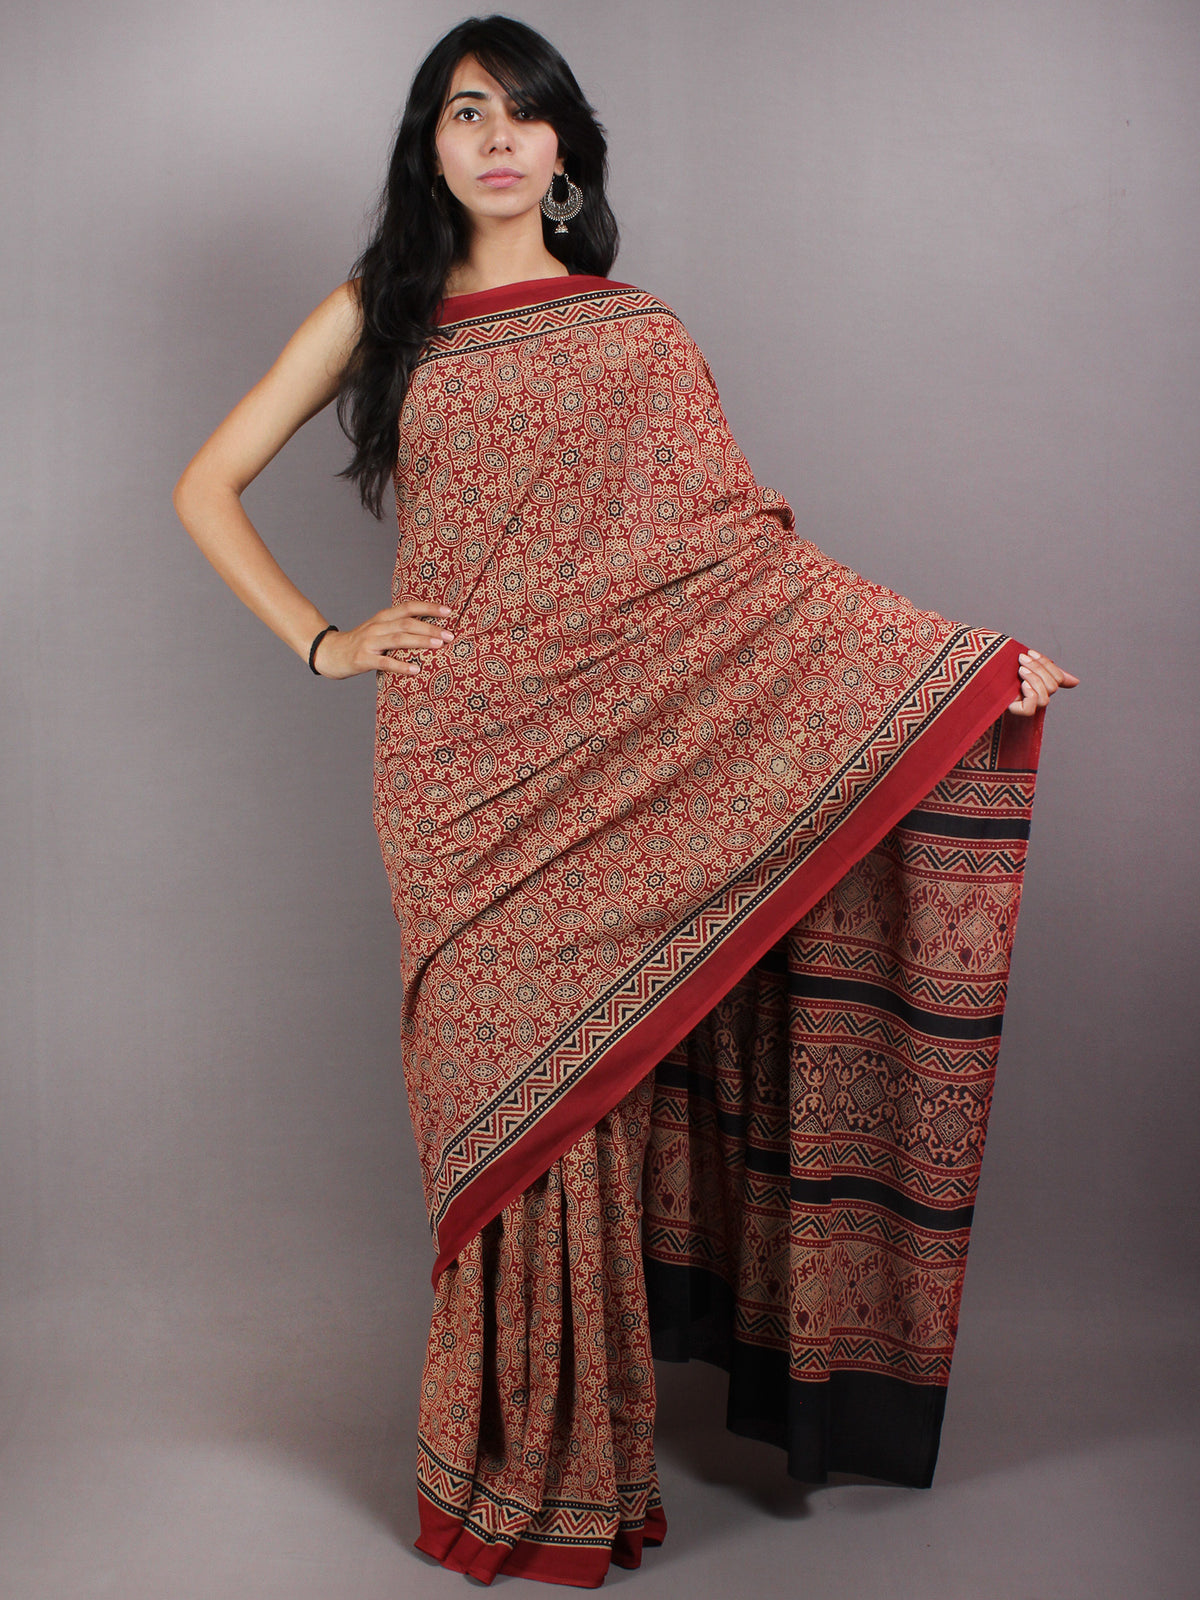 Red Beige Black Mughal Nakashi Ajrakh Hand Block Printed in Natural Vegetable Colors Cotton Mul Saree - S03170584